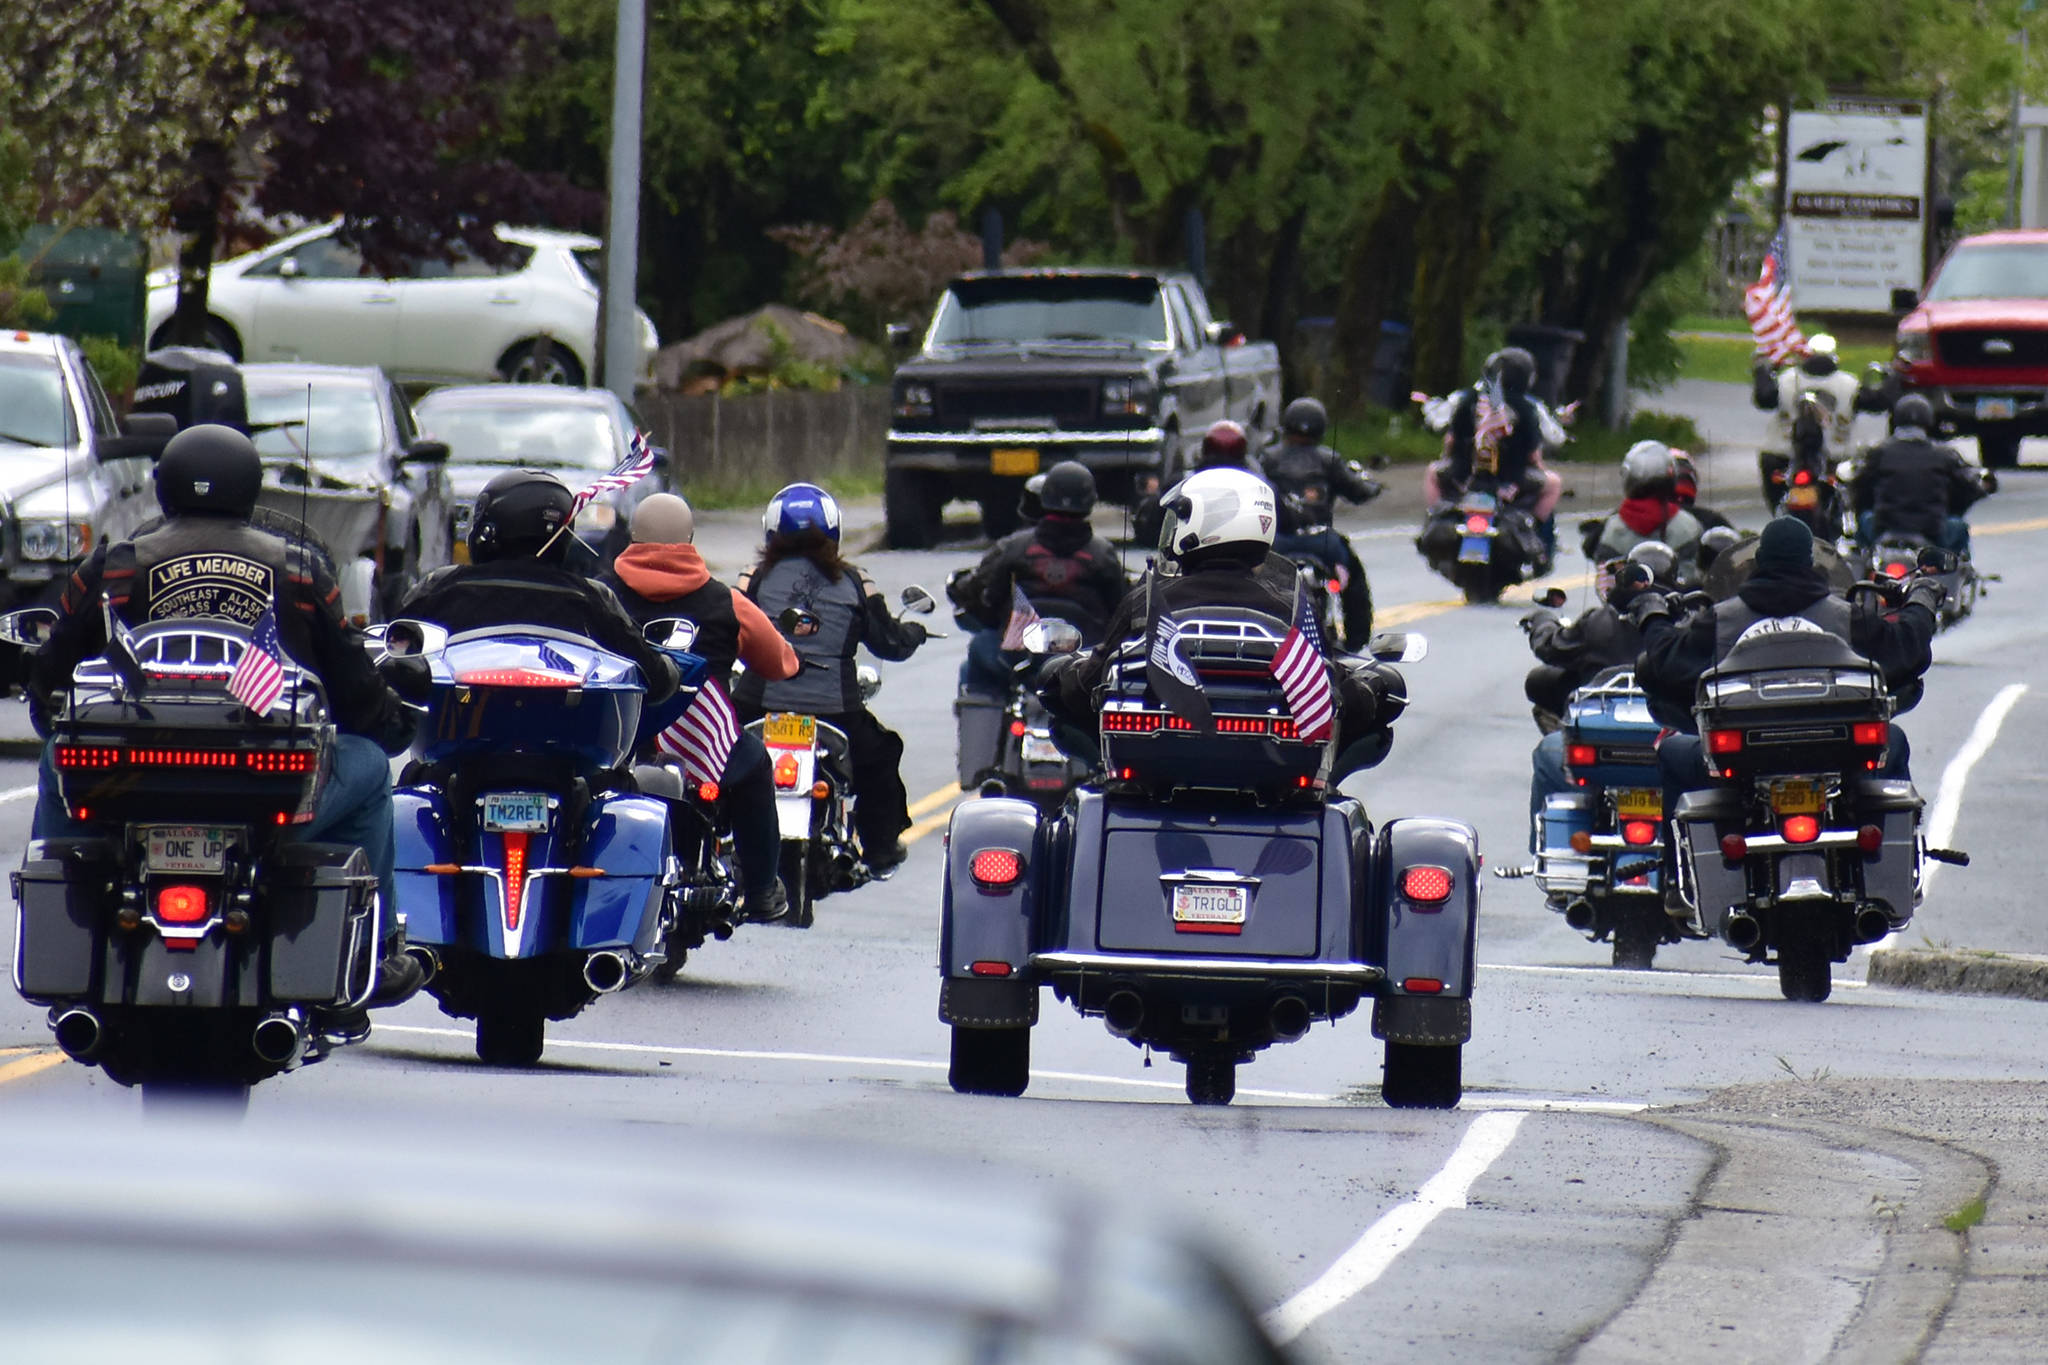 Members of the Southeast Alaska Tongass chapter of the Harley Owners Group head down Glacier Avenue past Juneau-Douglas High School: Yadaa.at Kalé on their way to Evergreen Cemetery for a moment of silence for deceased U.S. military members on Monday, May 25, 2020. (Peter Segall | Juneau Empire)